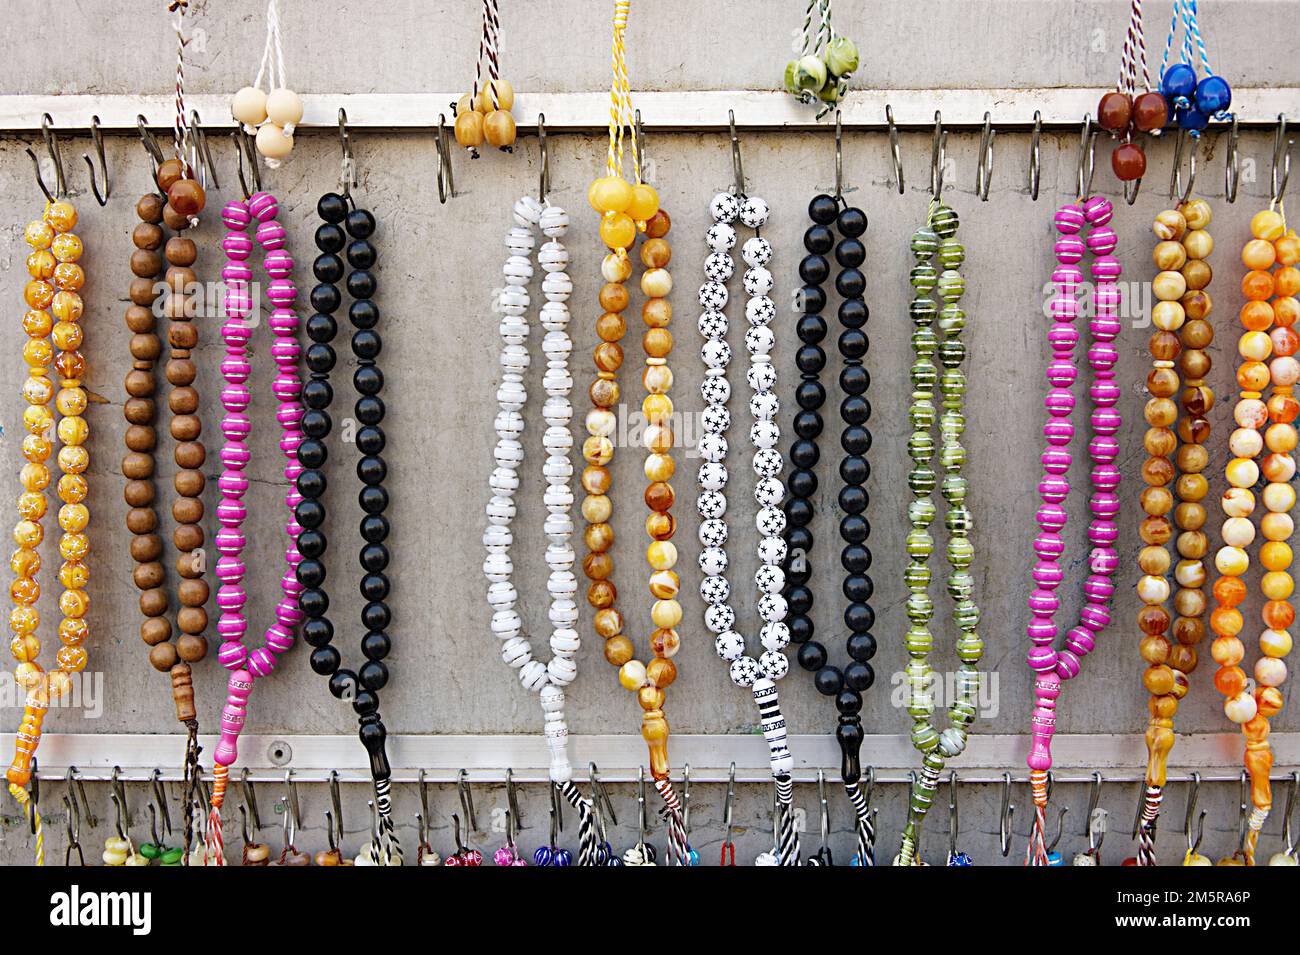 Many rosaries in various colors and materials are exposed at the shop Stock Photo